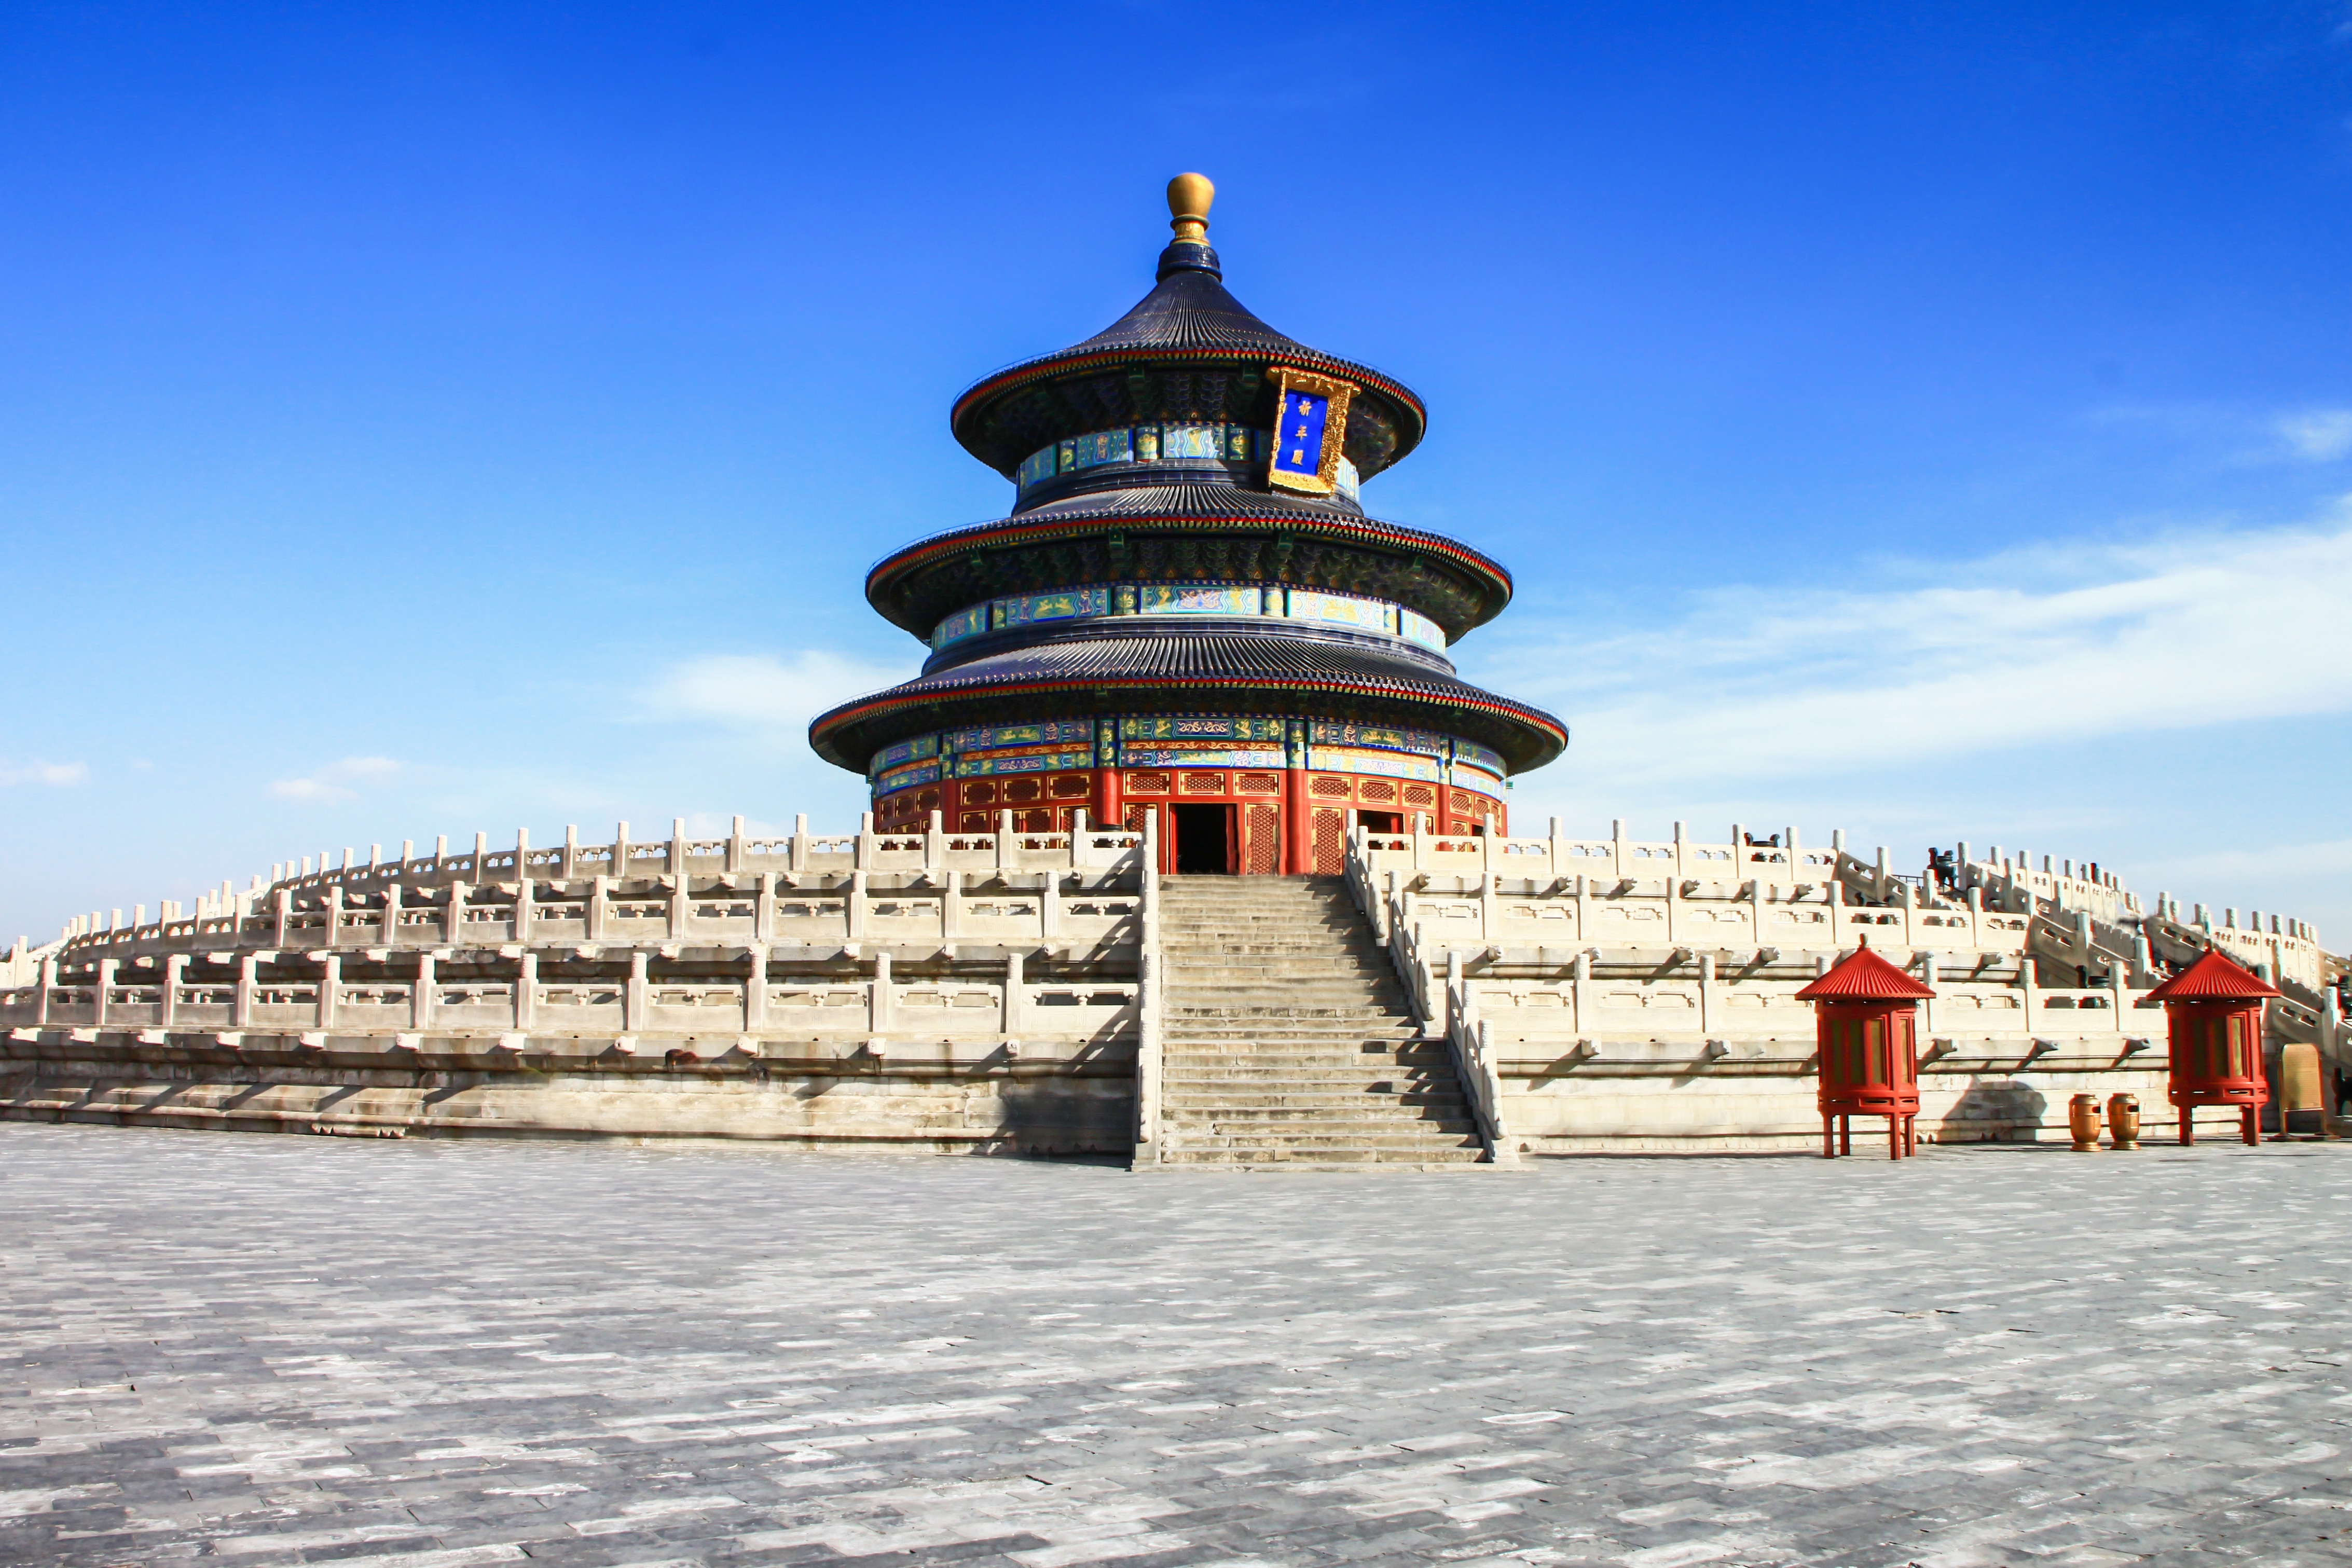 temple-of-heaven-one-of-the-top-attractions-in-beijing-china-yatra